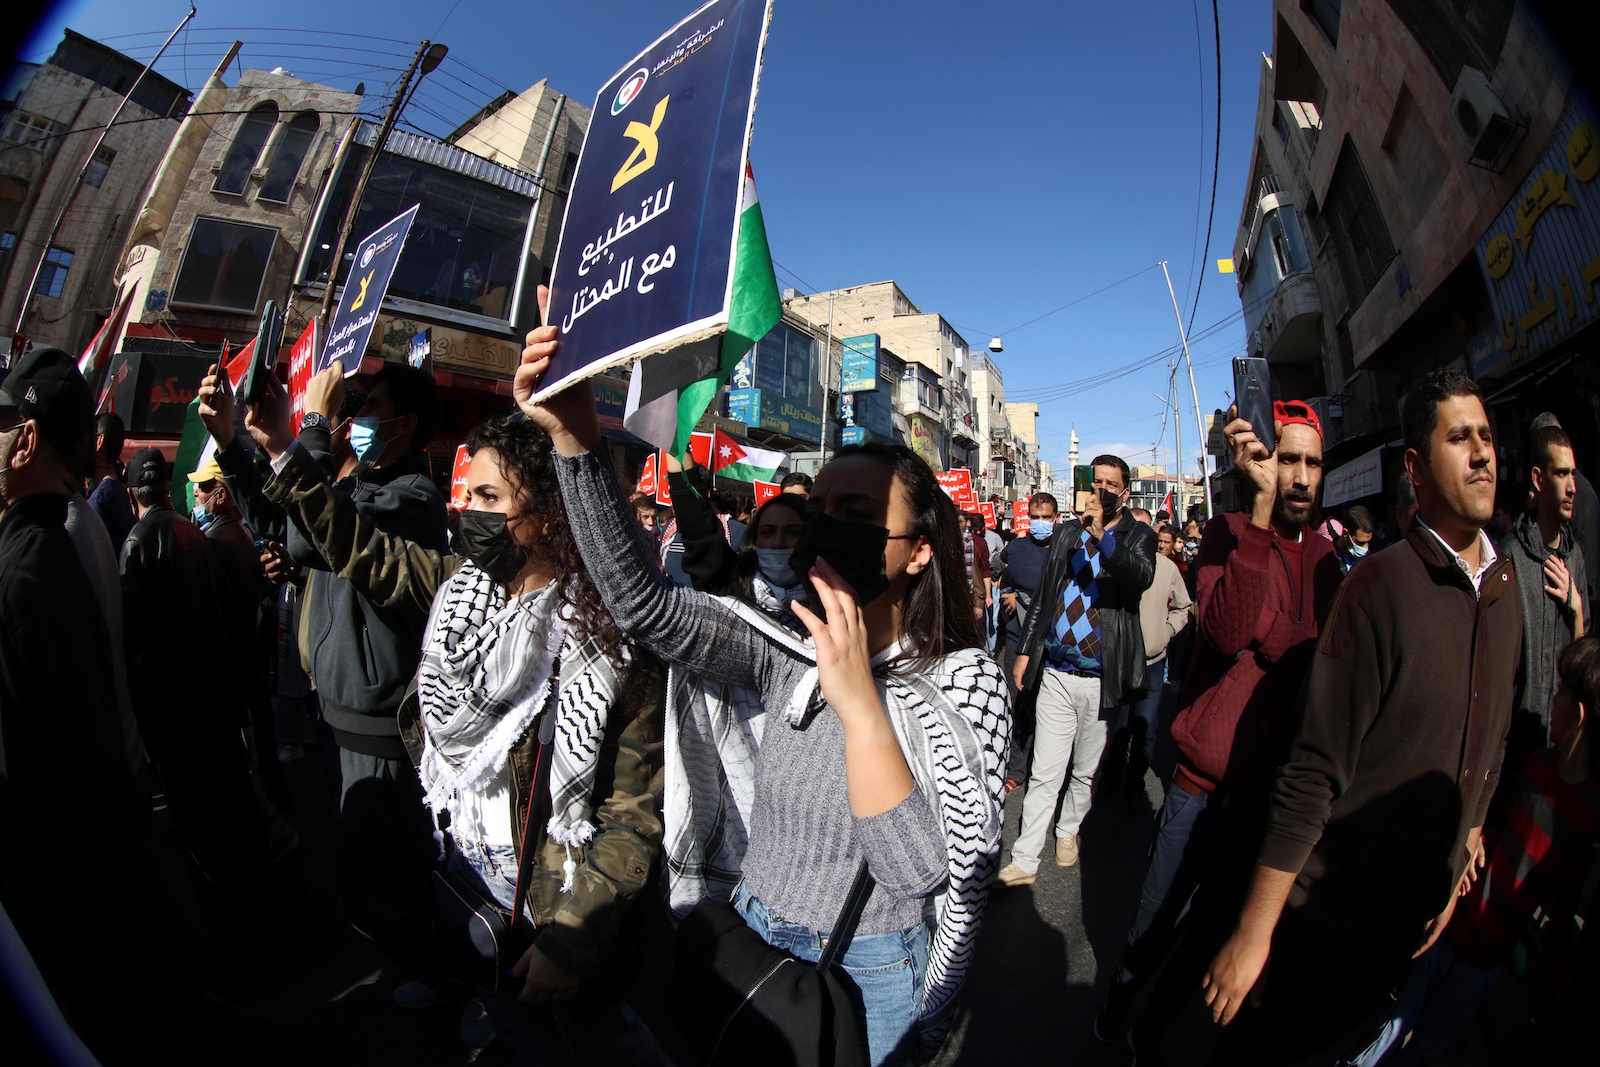 A group of people wave signs in arabic while march in the streets